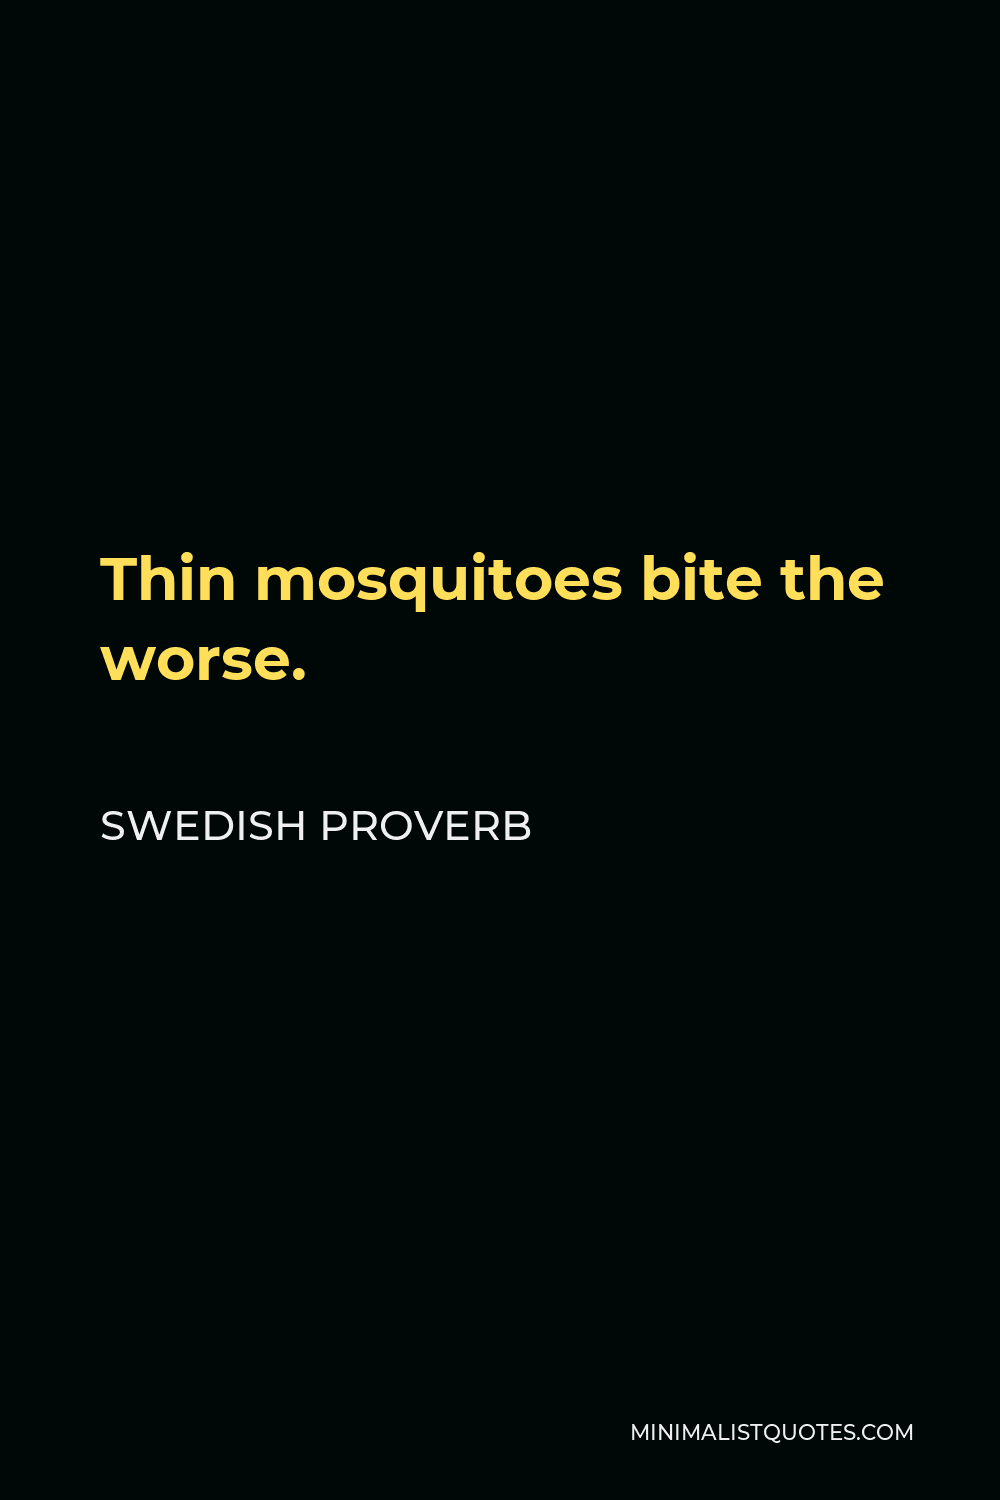 Swedish Proverb Quote - Thin mosquitoes bite the worse.